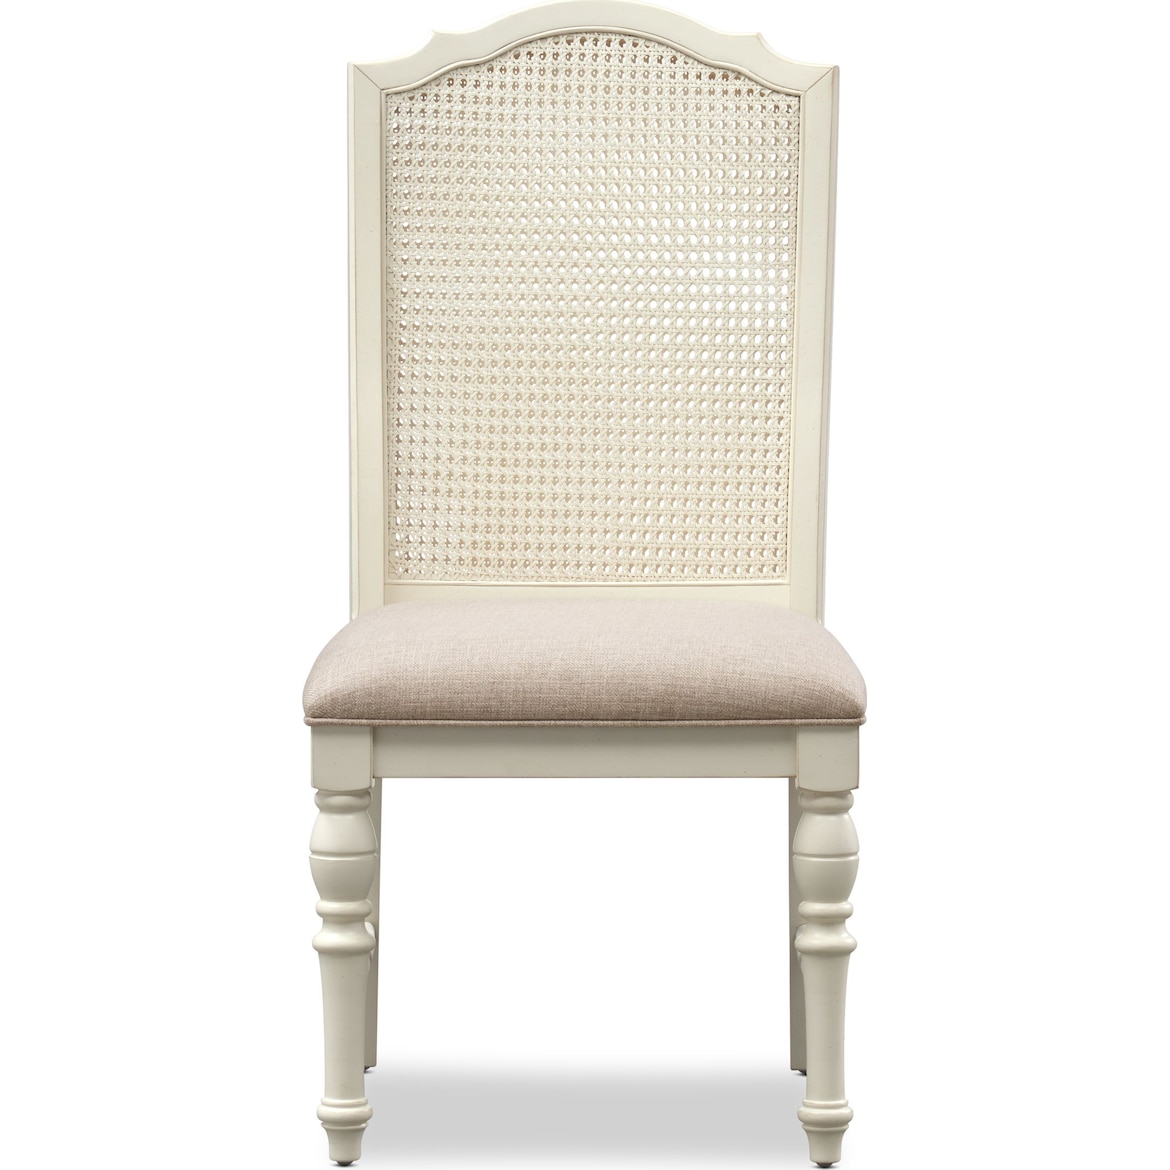 Charleston Cane Back Dining Chair American Signature